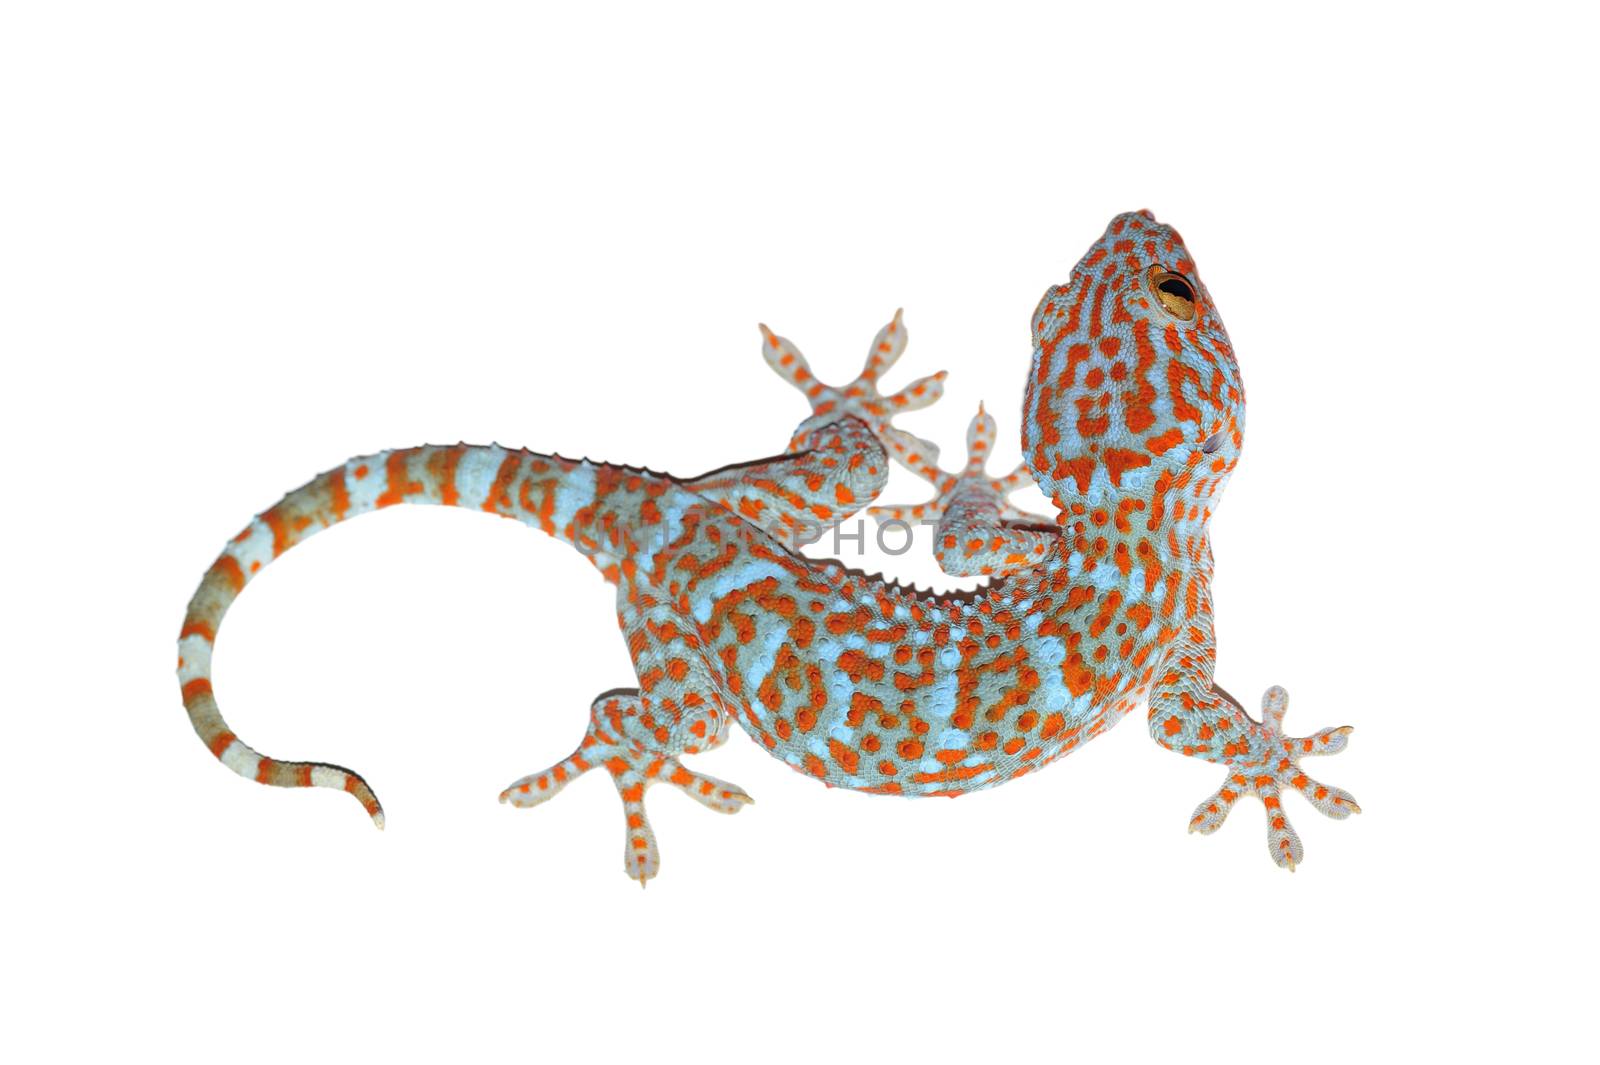 gecko isolated on white with clipping path by antpkr